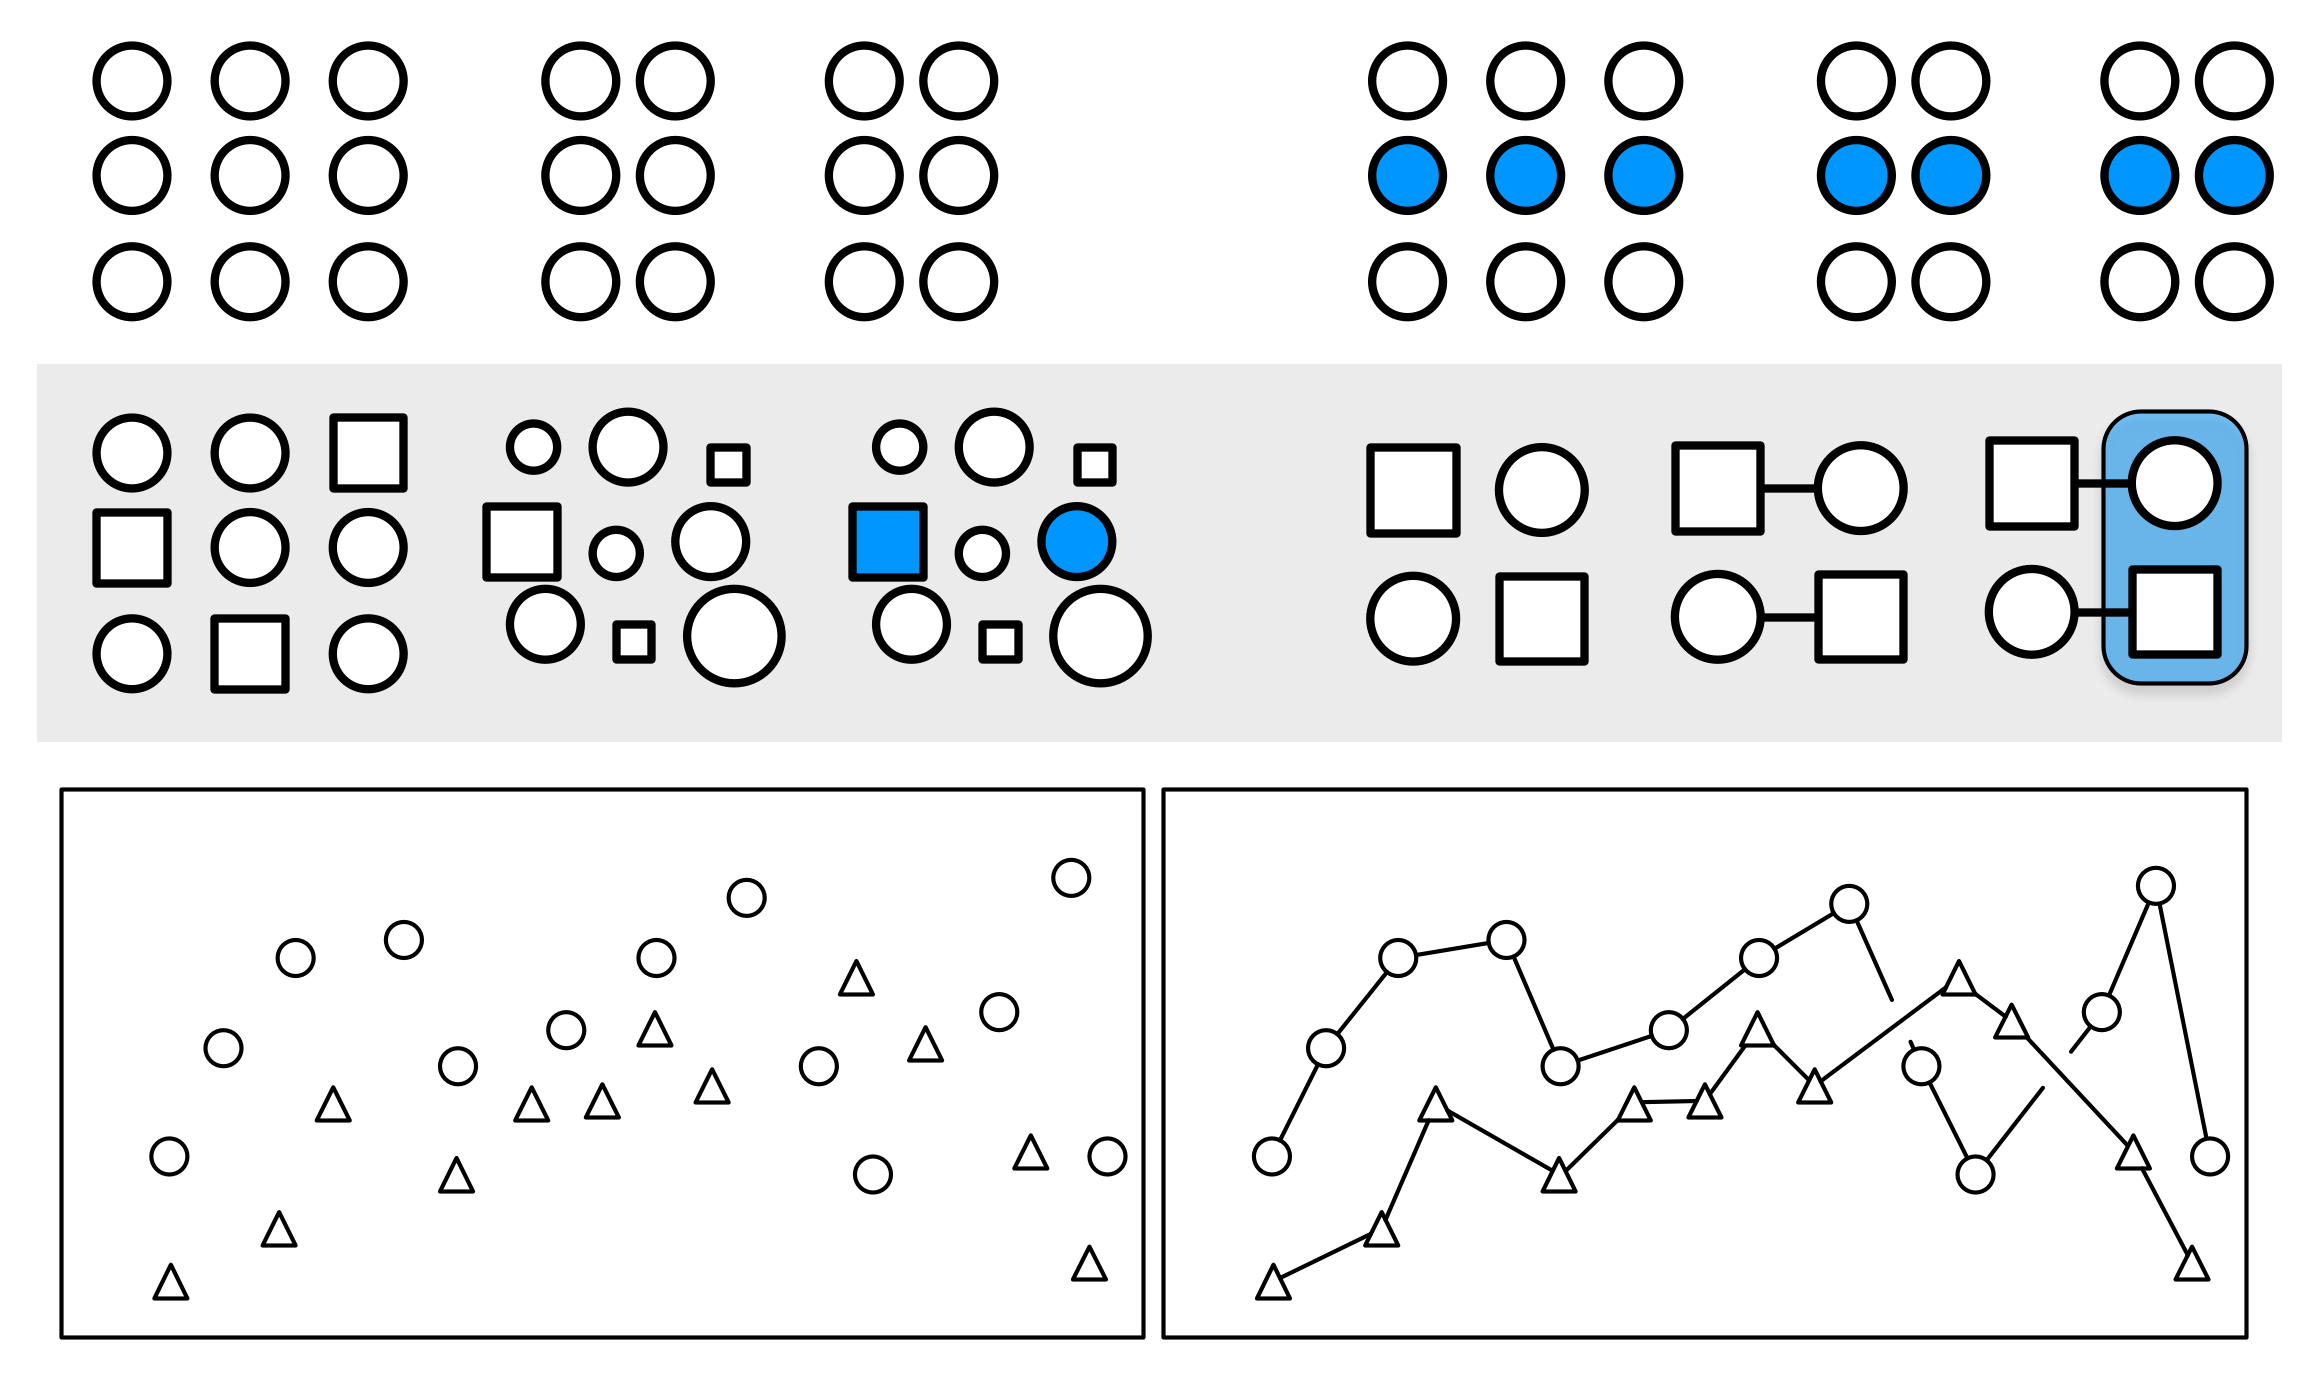 Gestalt inferences: Proximity, Similarity, Connection, Common Fate. The layout of the figure employs some of these principles, in addition to  displaying them